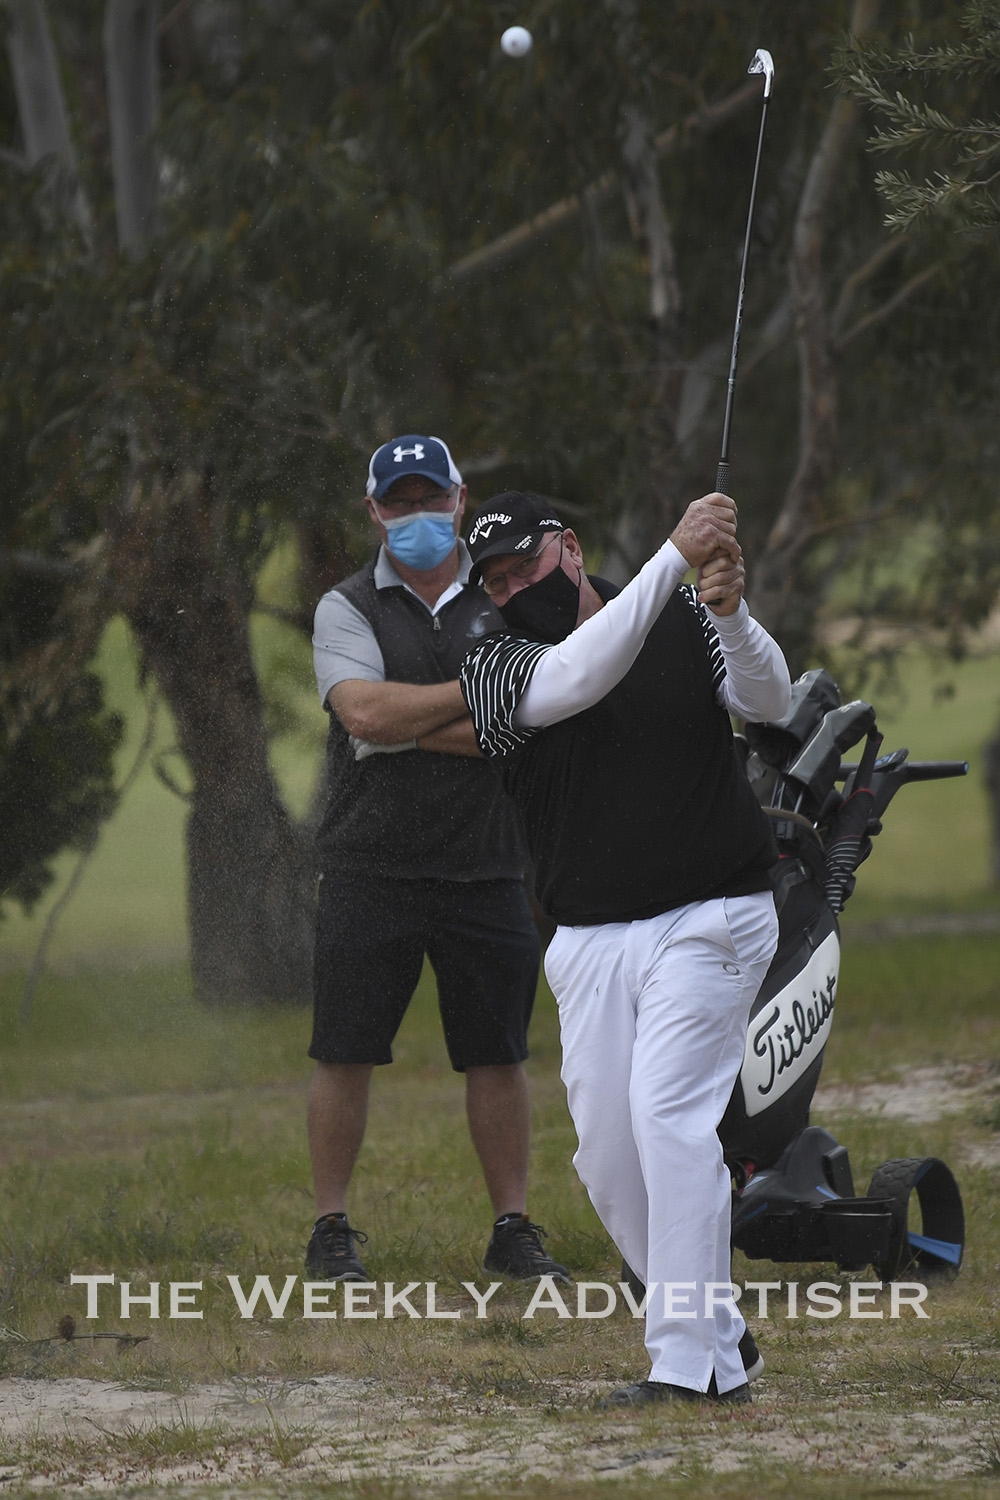 PHOTOS: Social golfers hit the course - The Weekly Advertiser